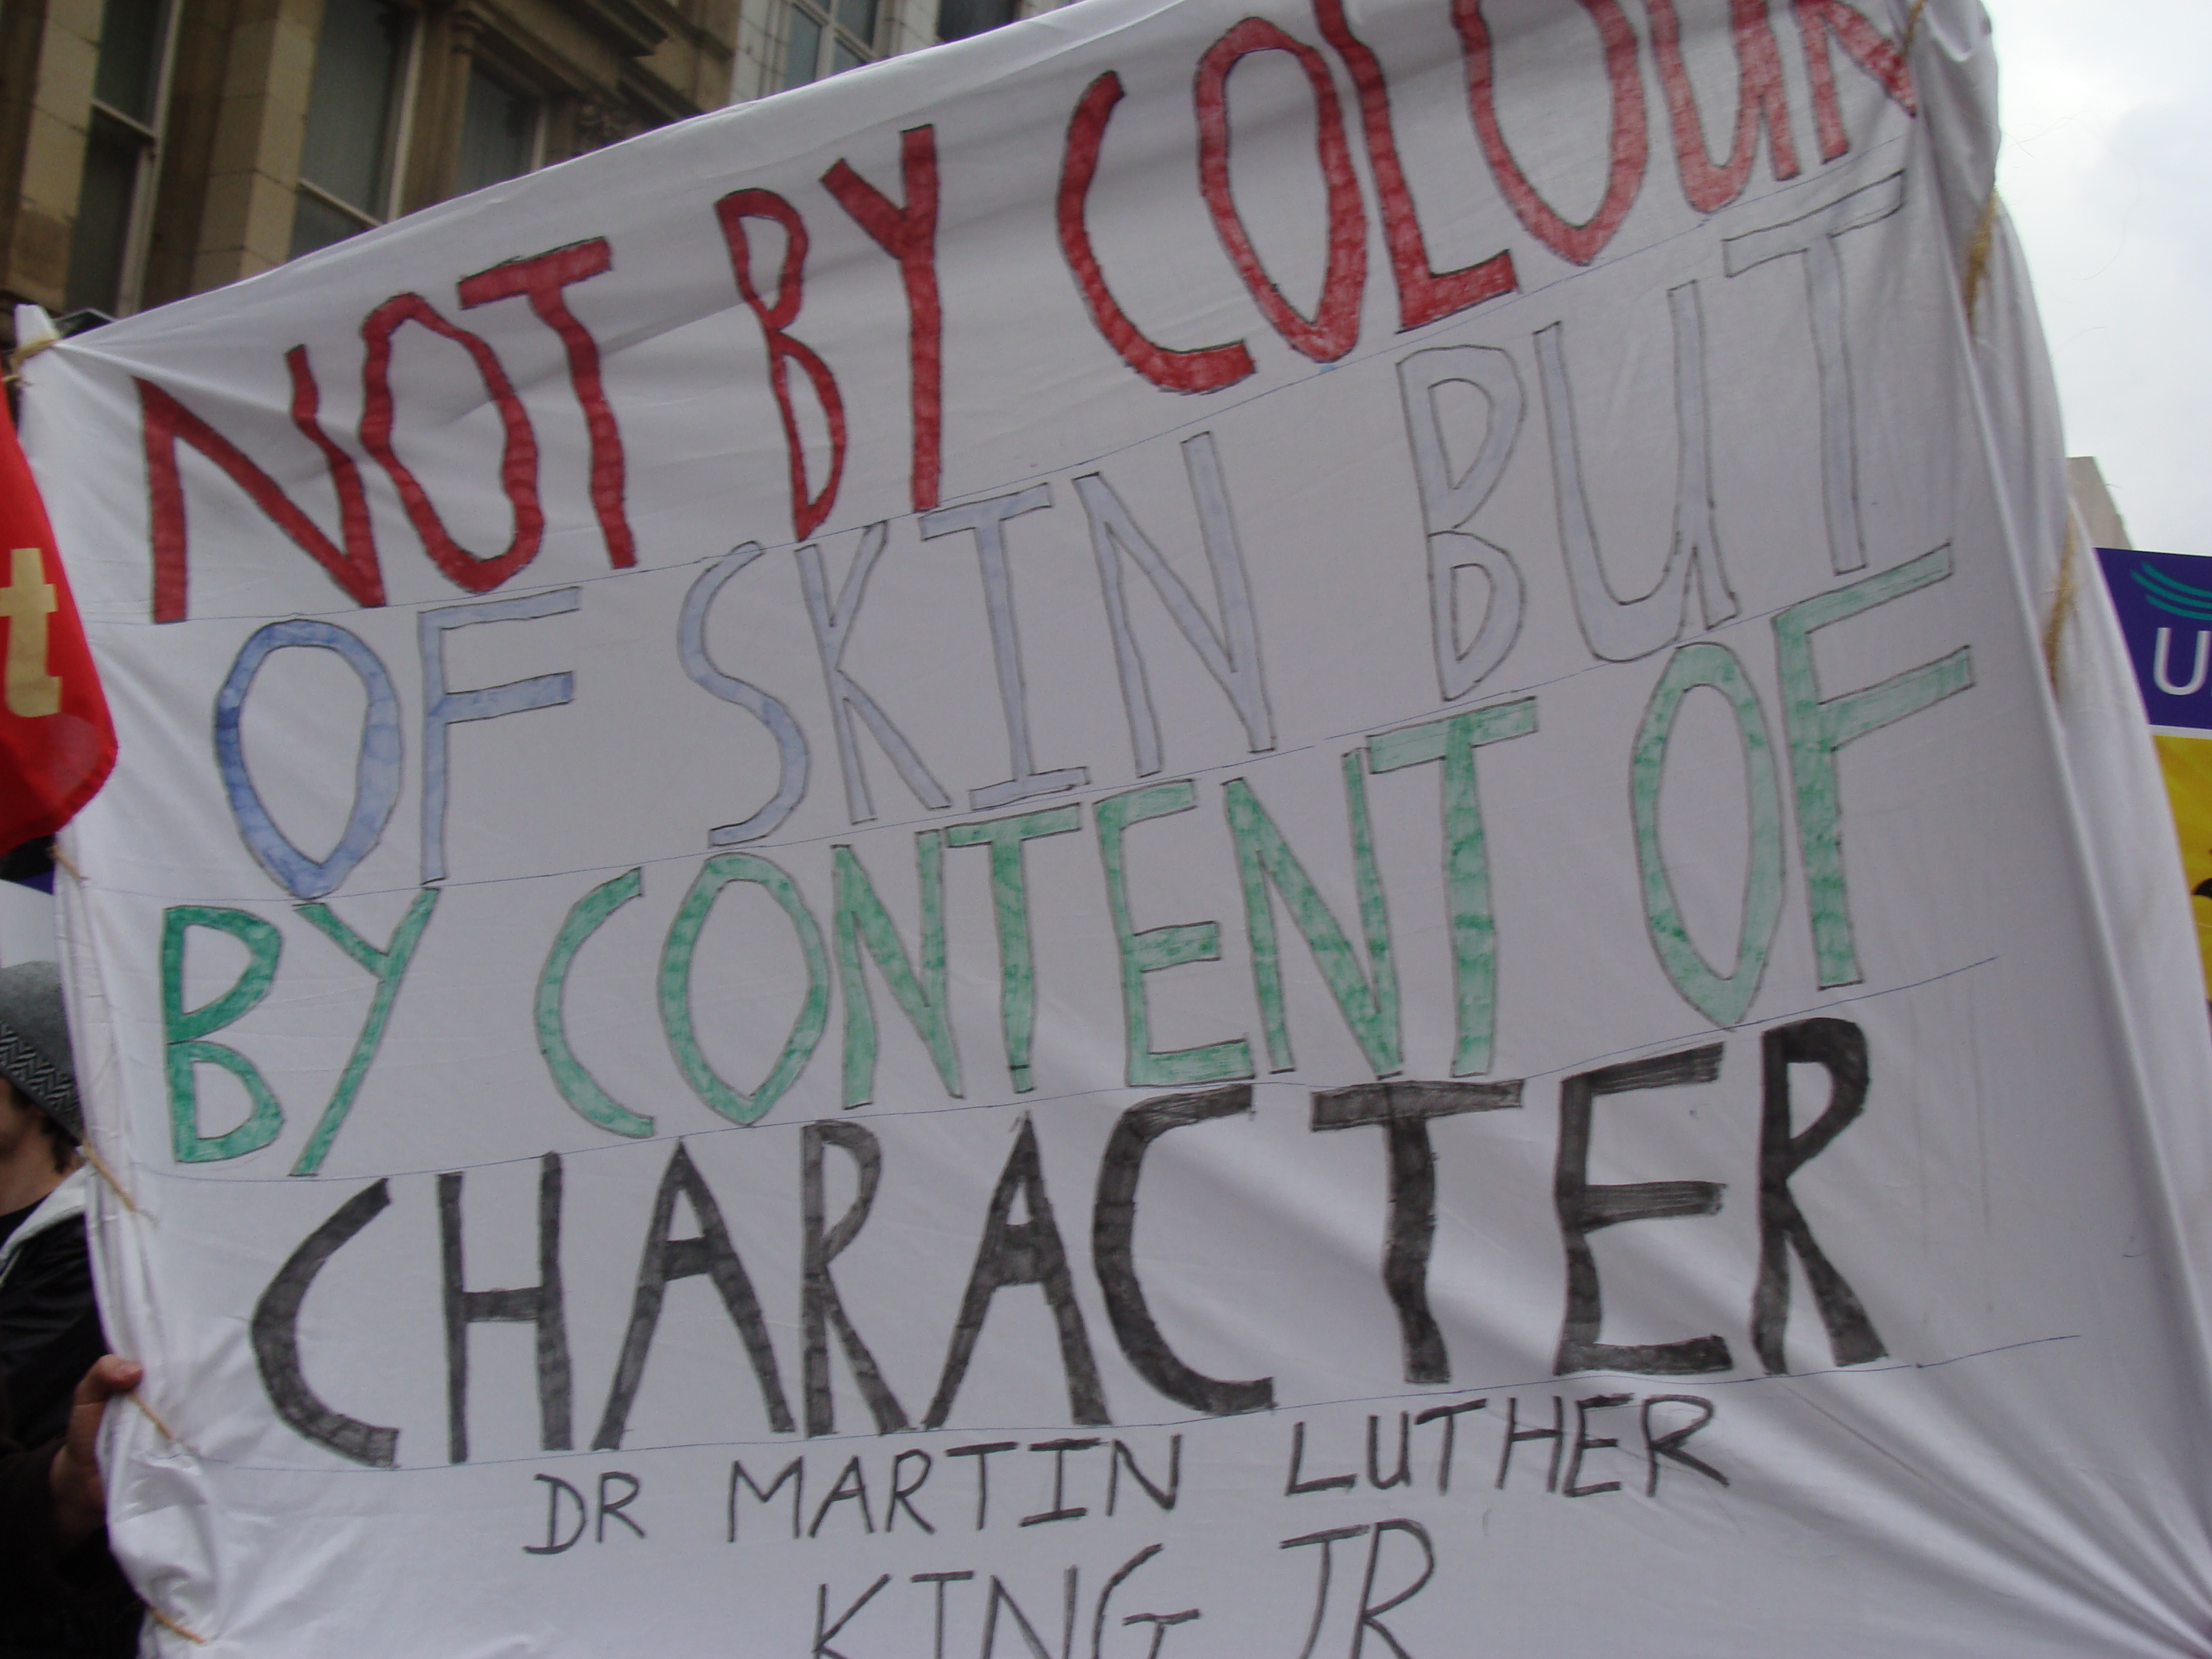 'Not by colour of skin, but by content of character' Dr. Martin Luther King Jr